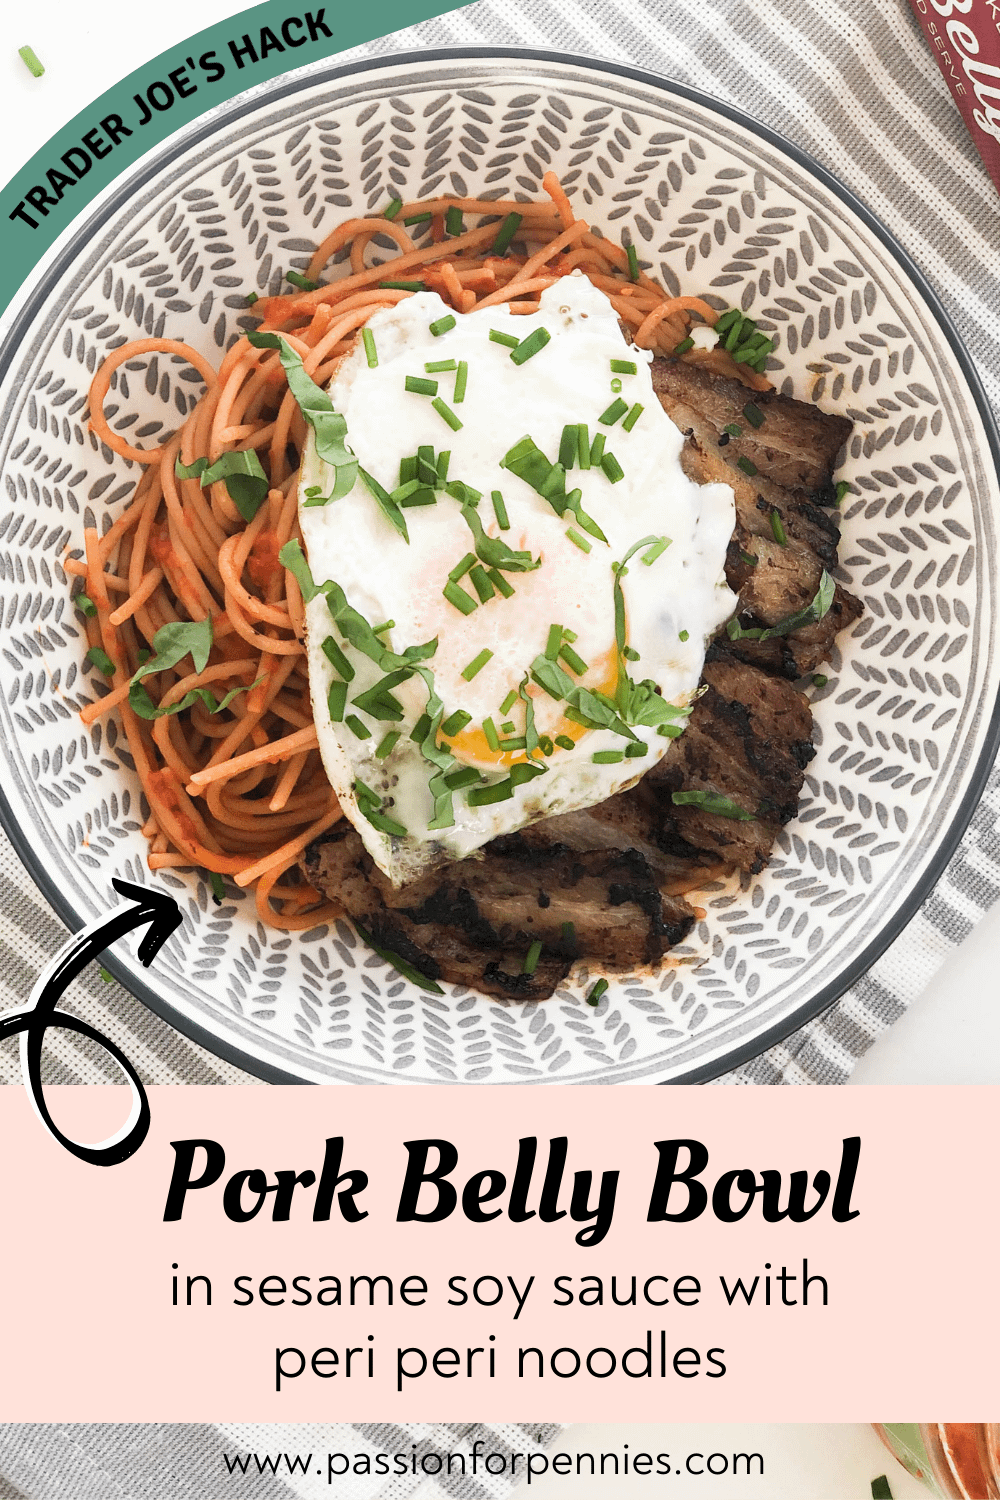 Passion For Pennies 2 - Pork Belly Bowl Pin